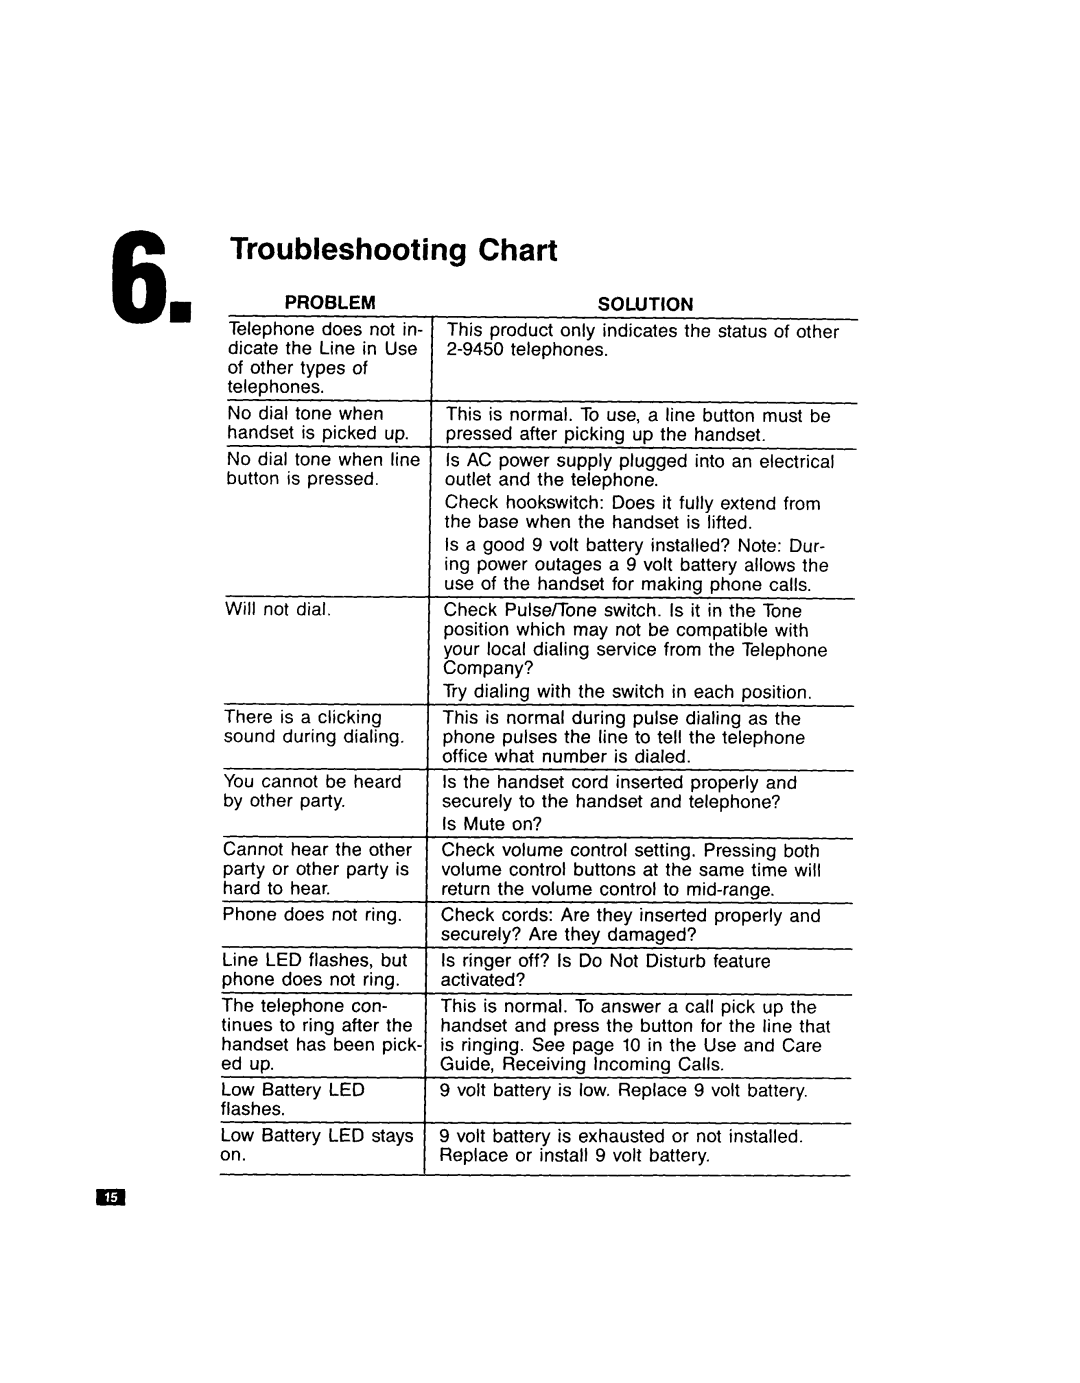 GE Feb-50 installation instructions Troubleshooting Chart, Solution, normal, handset, IS it, mid-range, fo~ the 